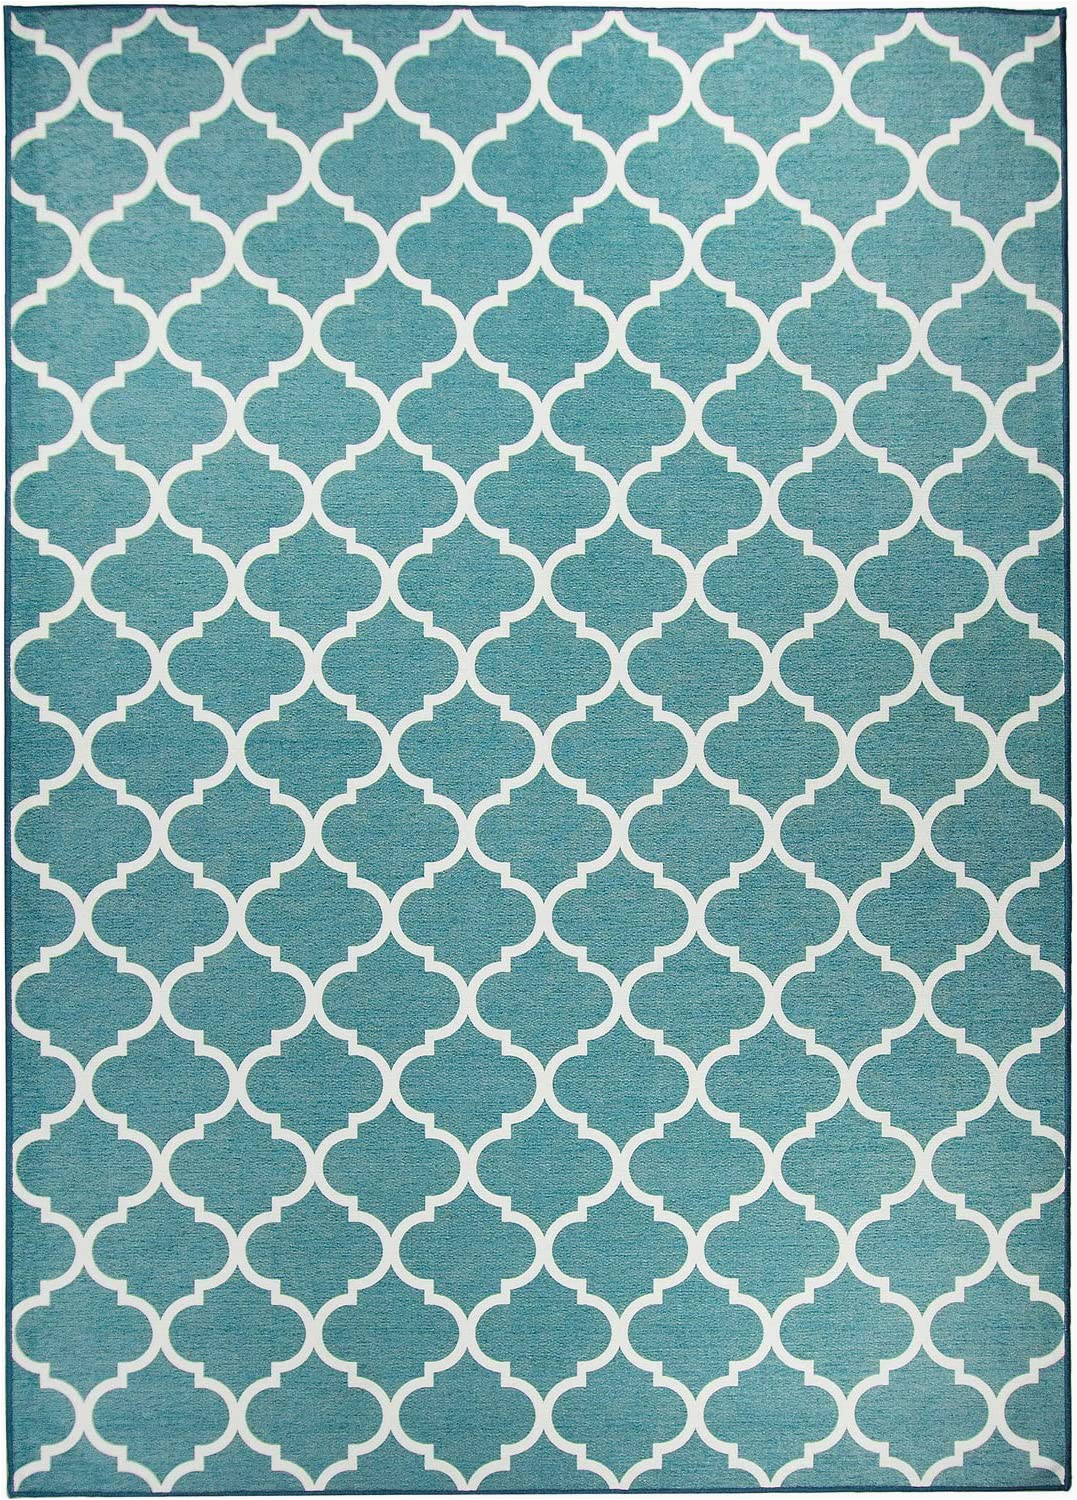 Washable area Rugs for Pets Ruggable Washable Stain Resistant Indoor Outdoor Kids Pets and Dog Friendly area Rug 5 X7 Moroccan Trellis Teal